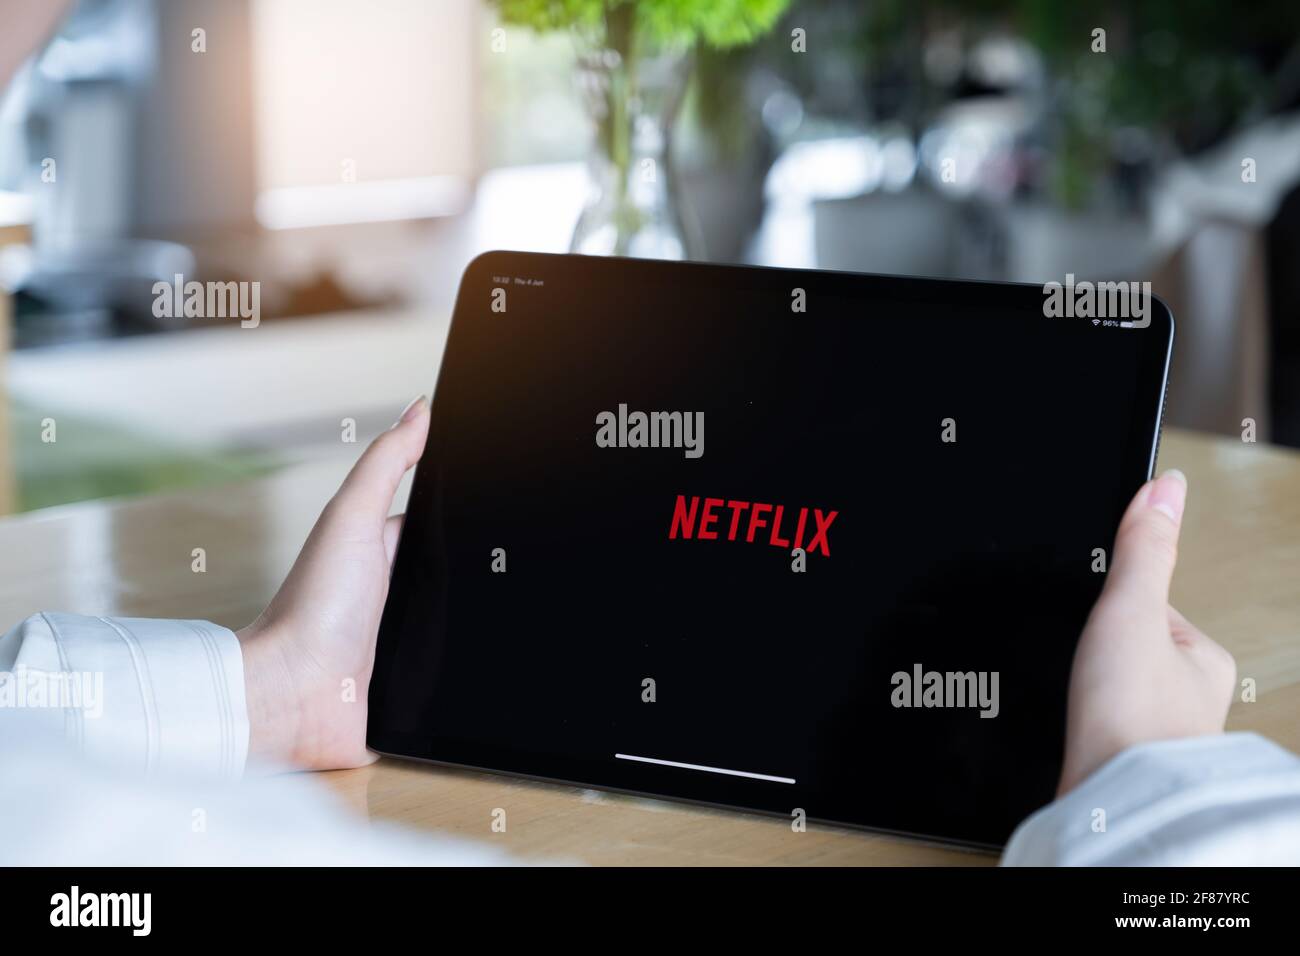 CHIANG MAI, THAILAND : JULY 26, 2020 : Netflix app on ipad screen. Netflix is an international leading subscription service for watching TV episodes Stock Photo